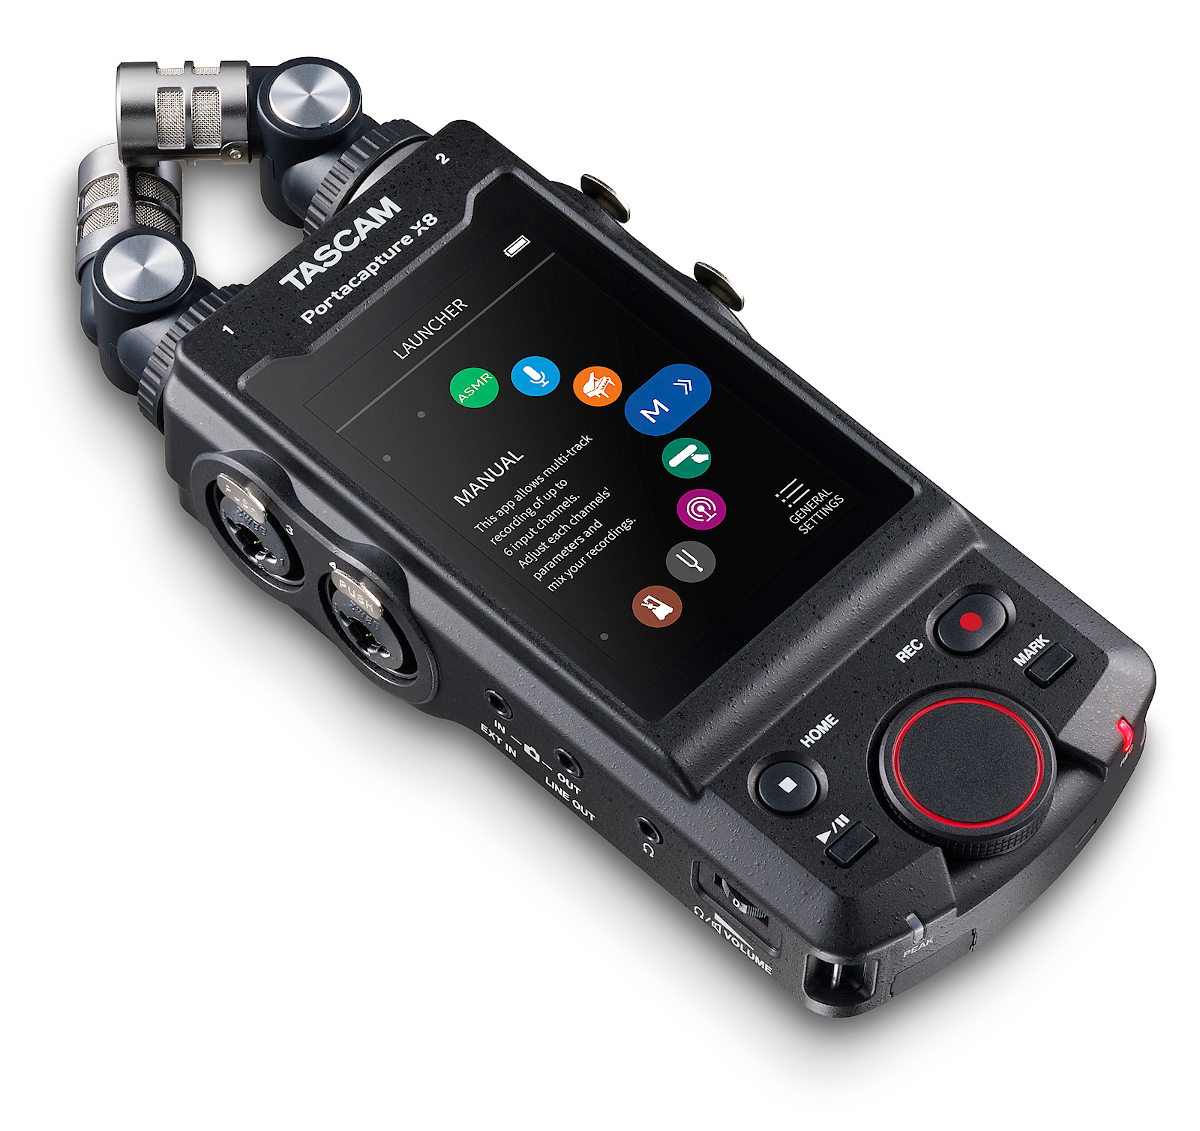 Tascam Portacapture X8: Portable 8-track audio recorder with 4 x XLR and 32bit float